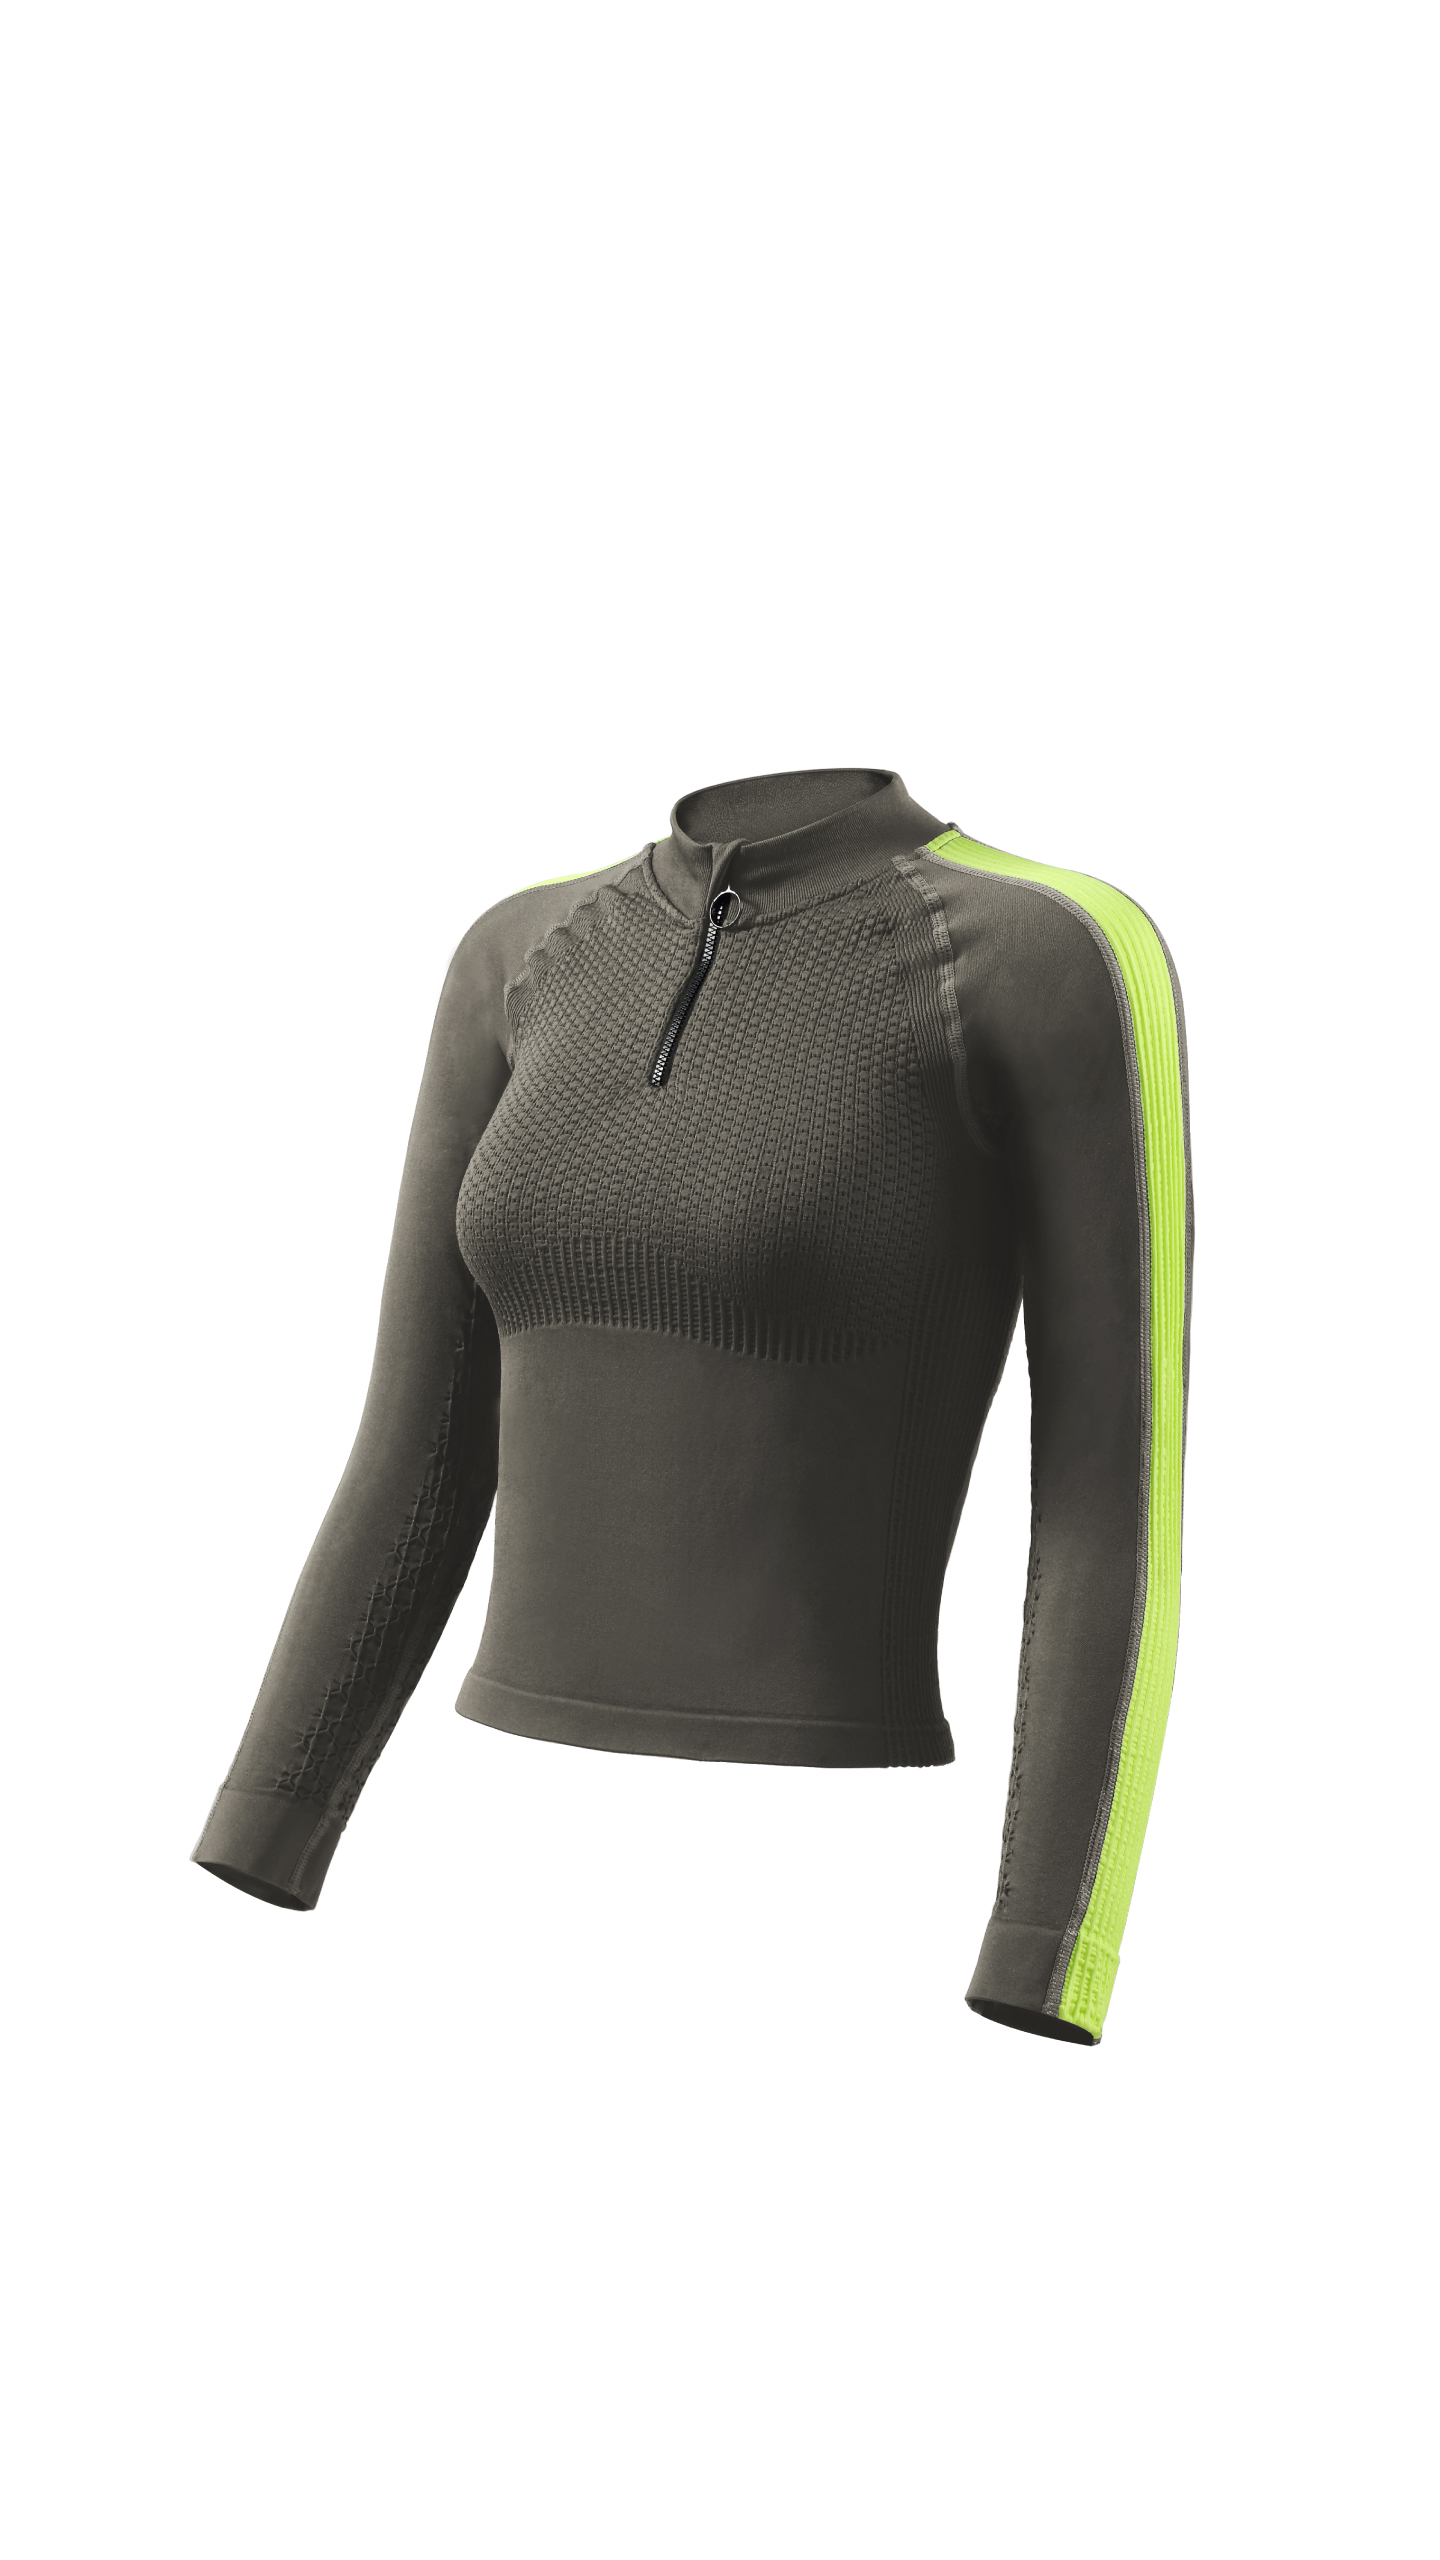 Wearx - 3D seamlessin athletic long sleeve shirts